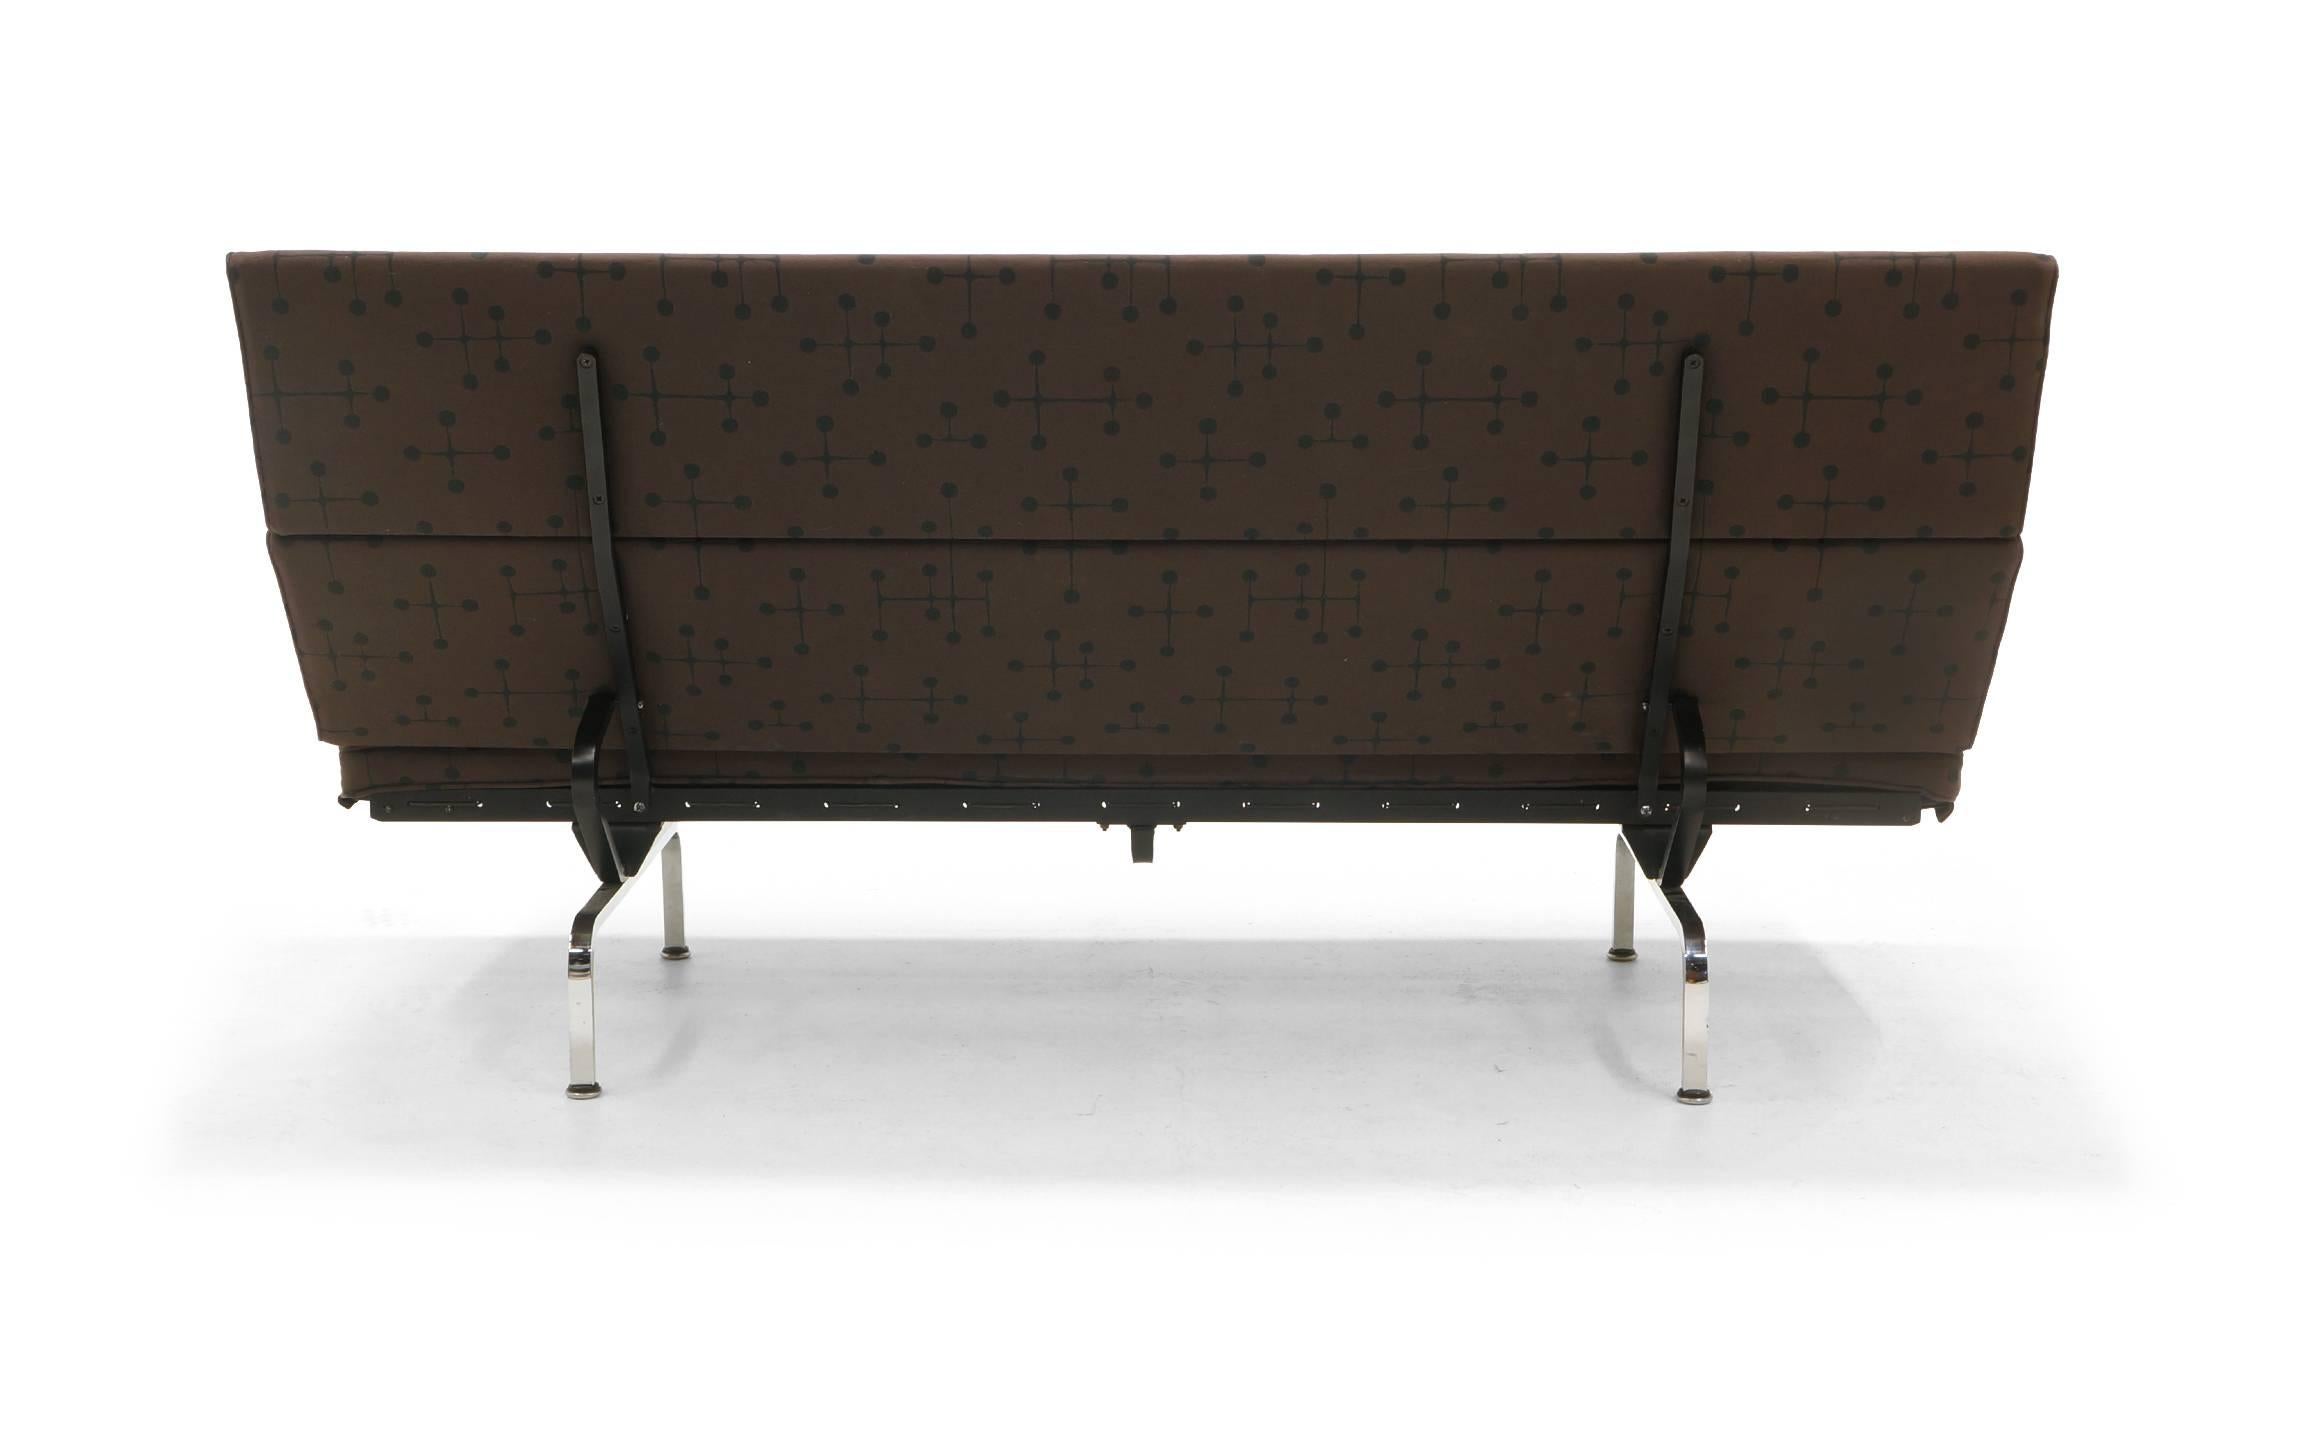 American Charles and Ray Eames Sofa Compact for Herman Miller in Eames Dot Pattern Fabric